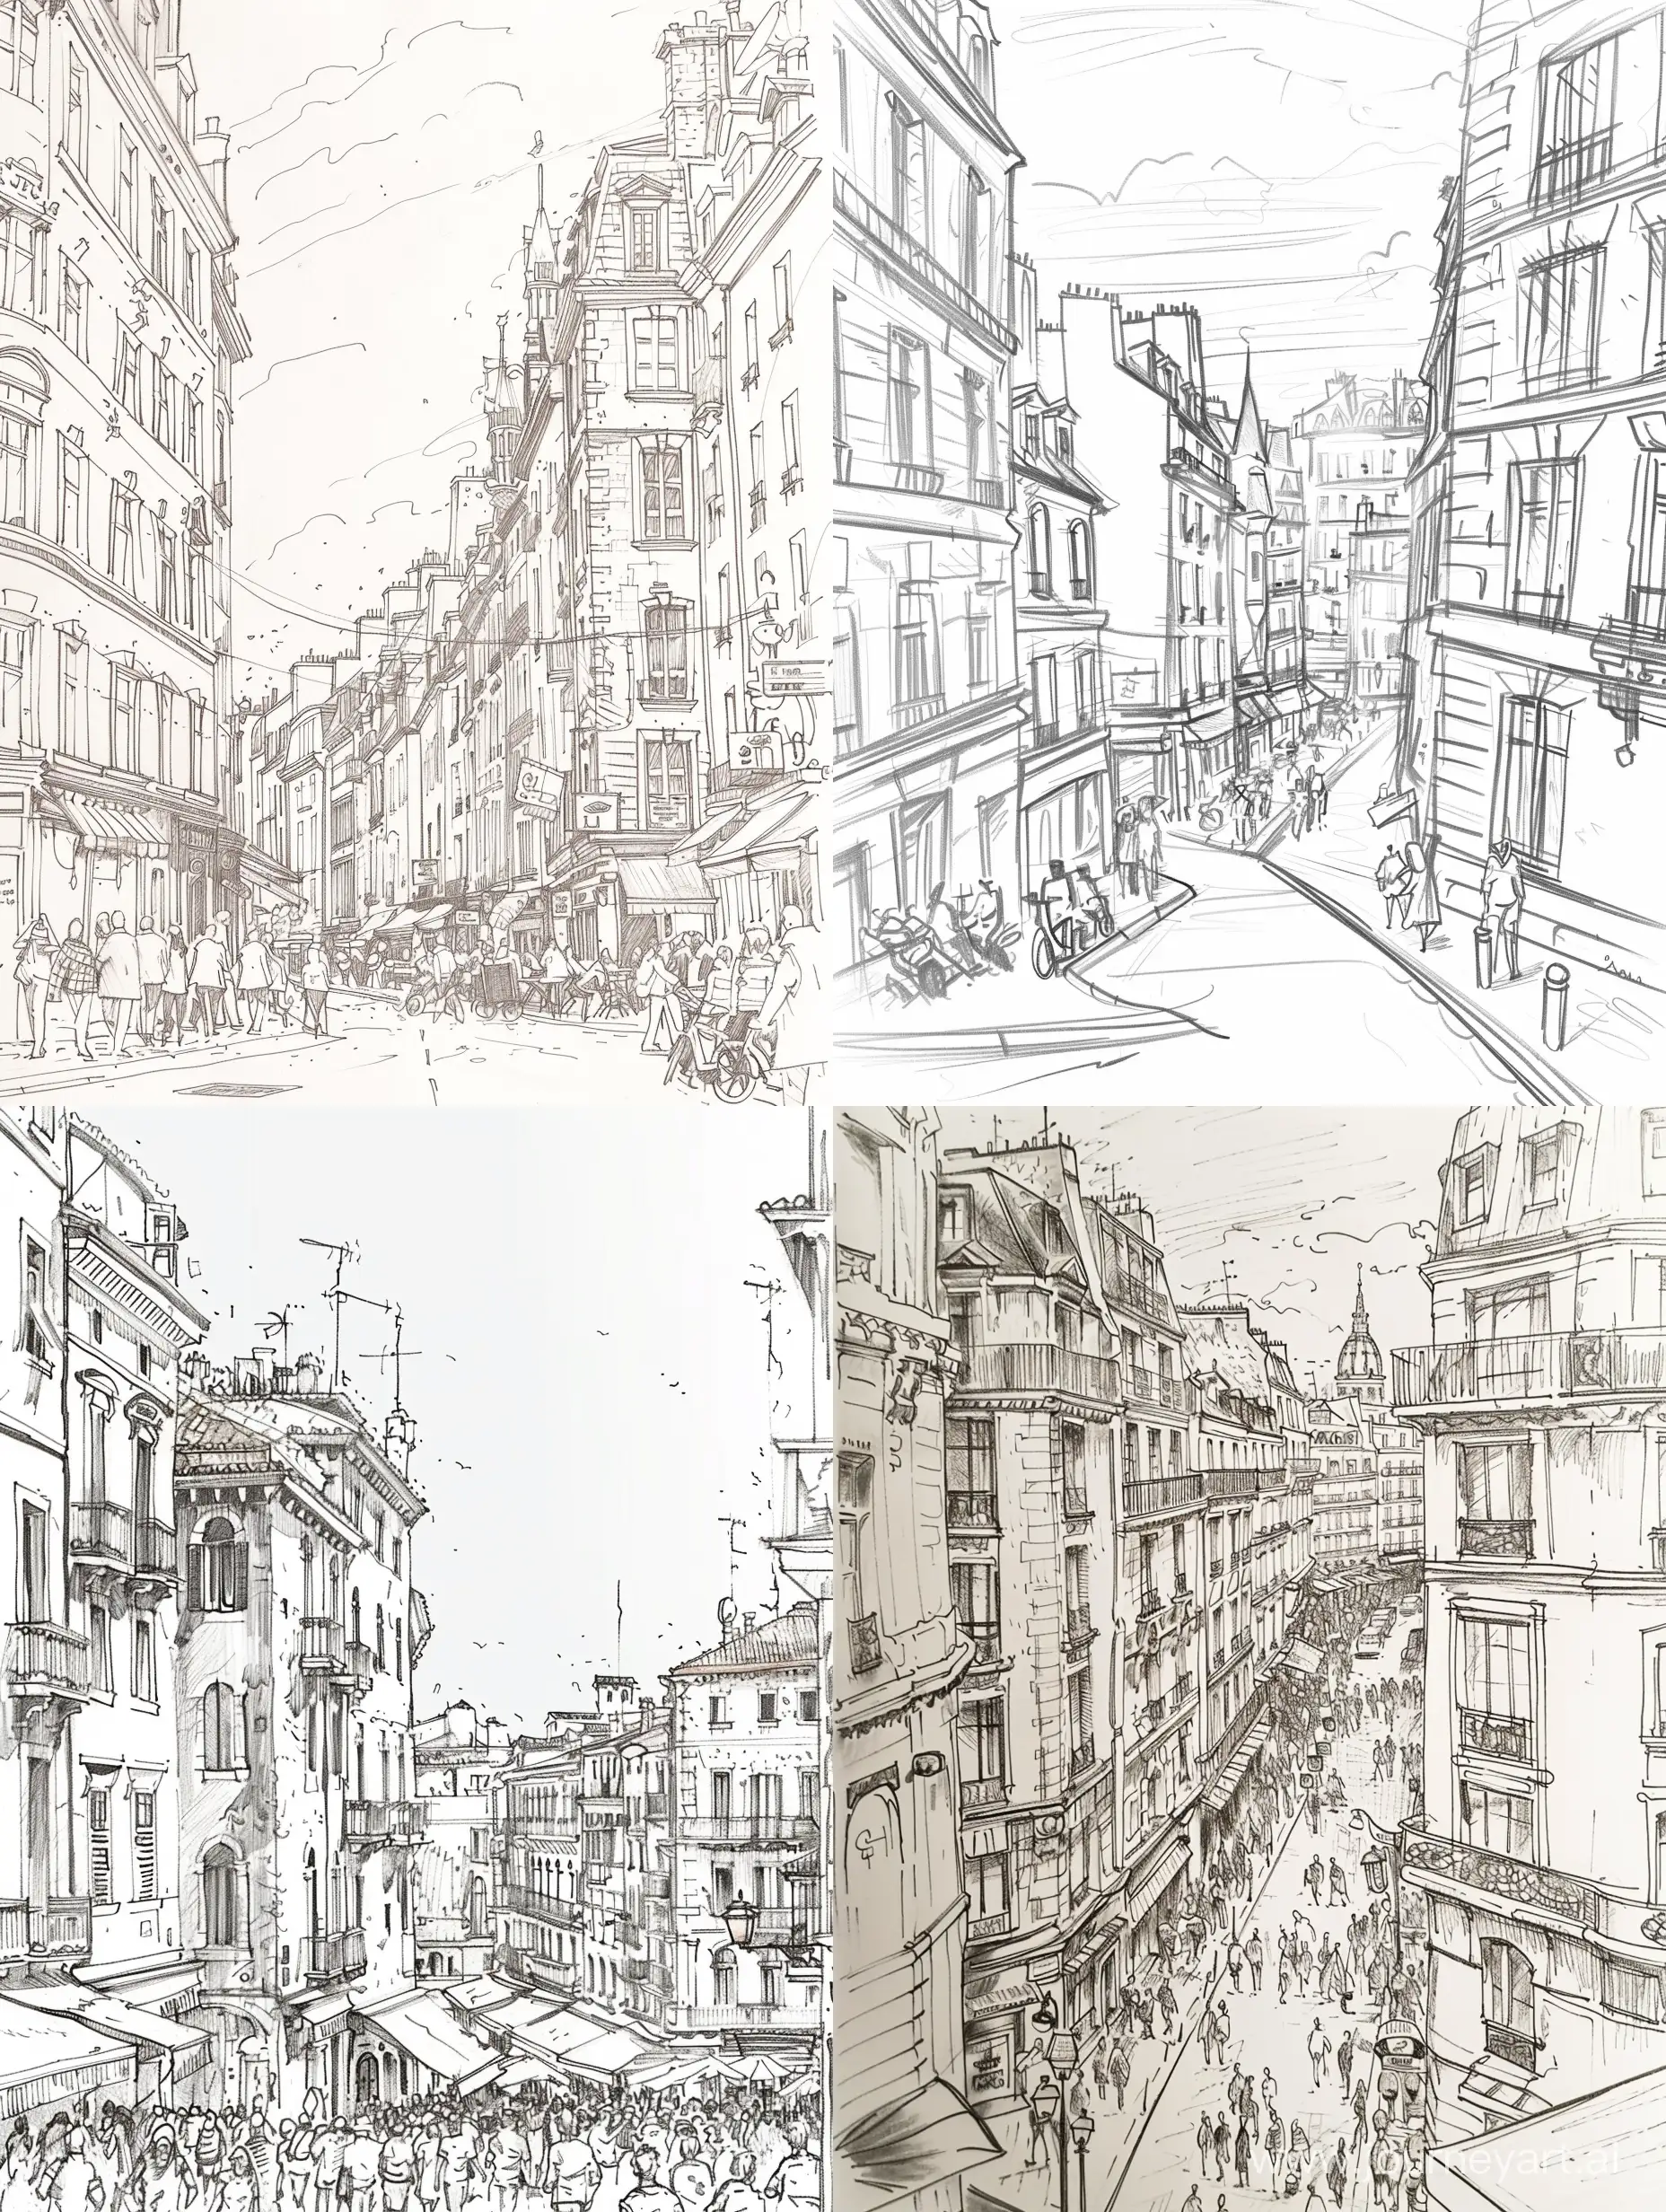 Drawing some buildings by the crowded street with rapid that fills the entire page and is easy to draw over